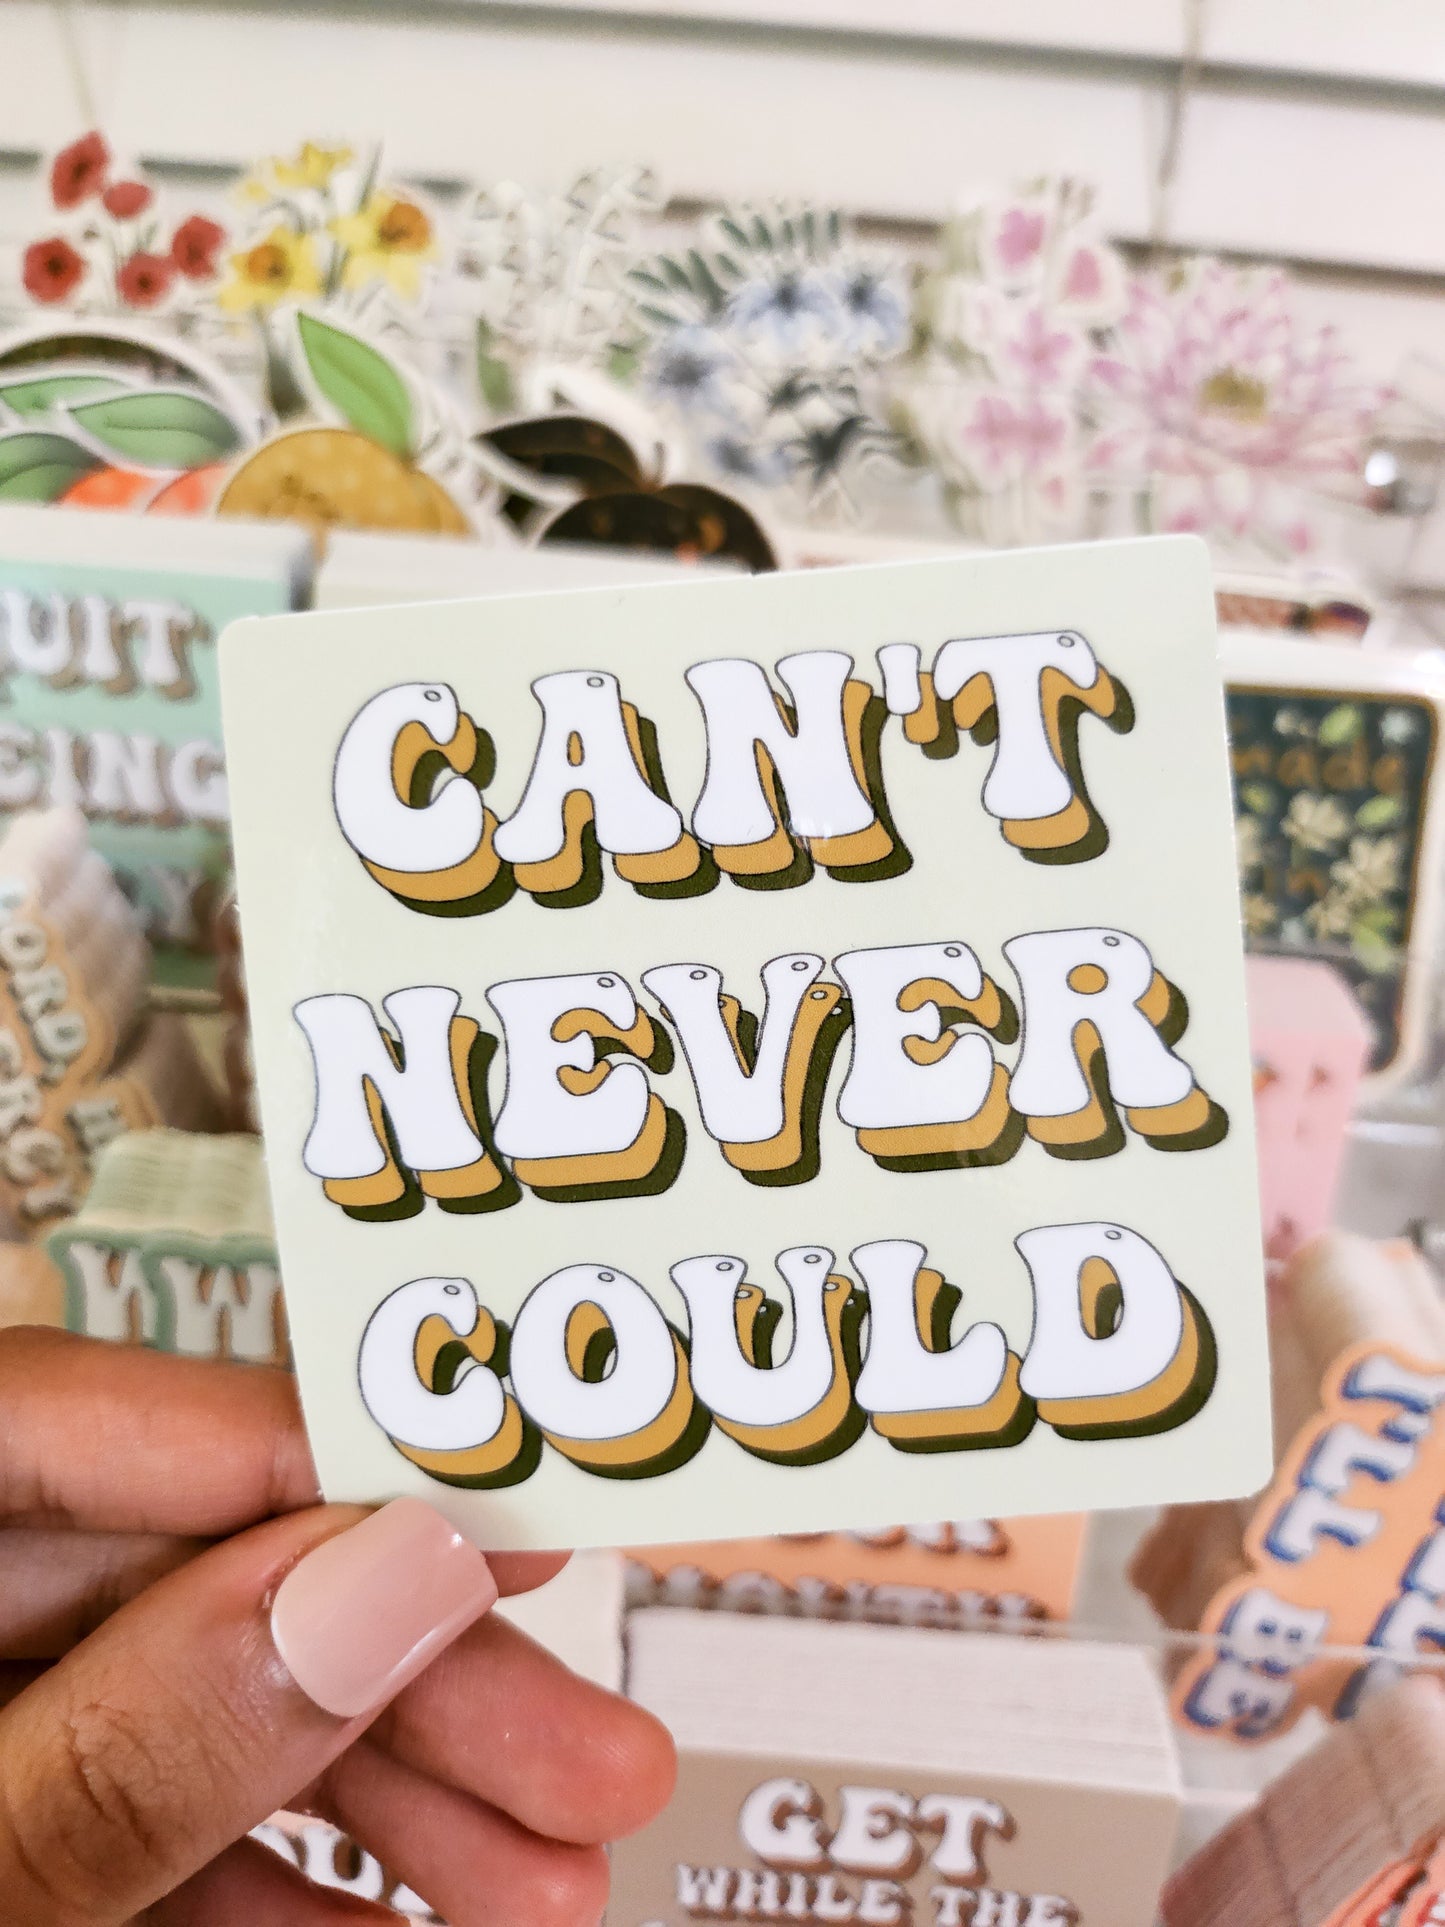 Can't Never Could Sticker, Vinyl, 3 x 3in